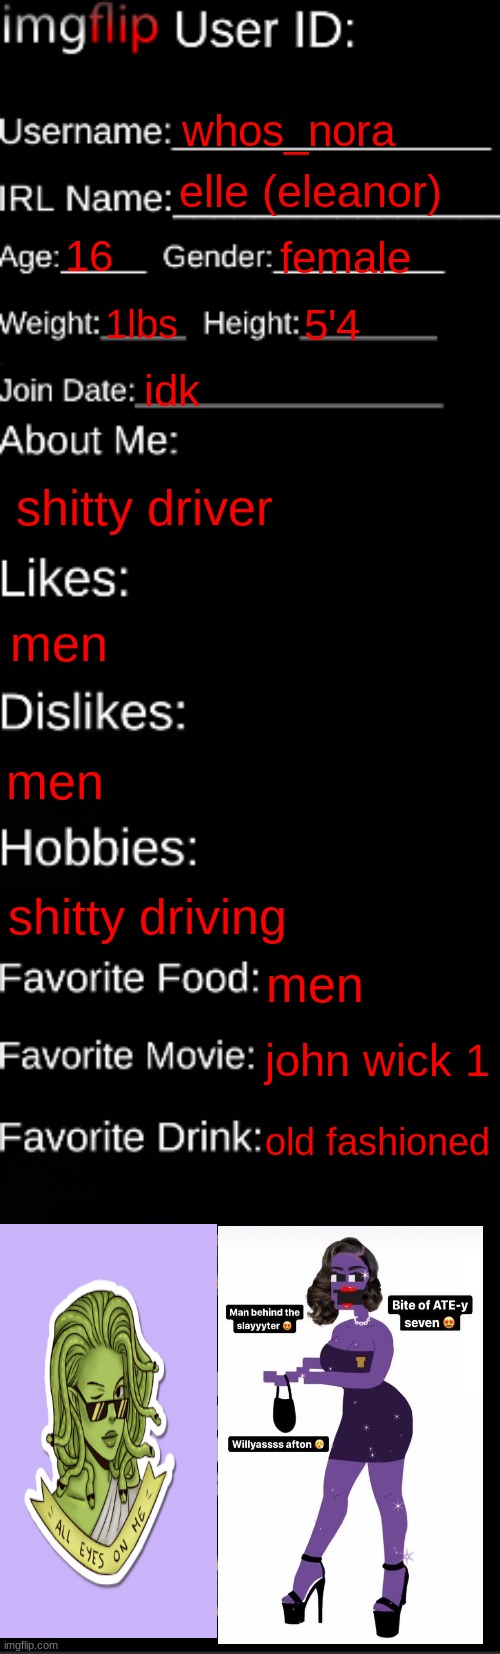 me :D | whos_nora; elle (eleanor); 16; female; 1lbs; 5'4; idk; shitty driver; men; men; shitty driving; men; john wick 1; old fashioned | image tagged in imgflip id card | made w/ Imgflip meme maker